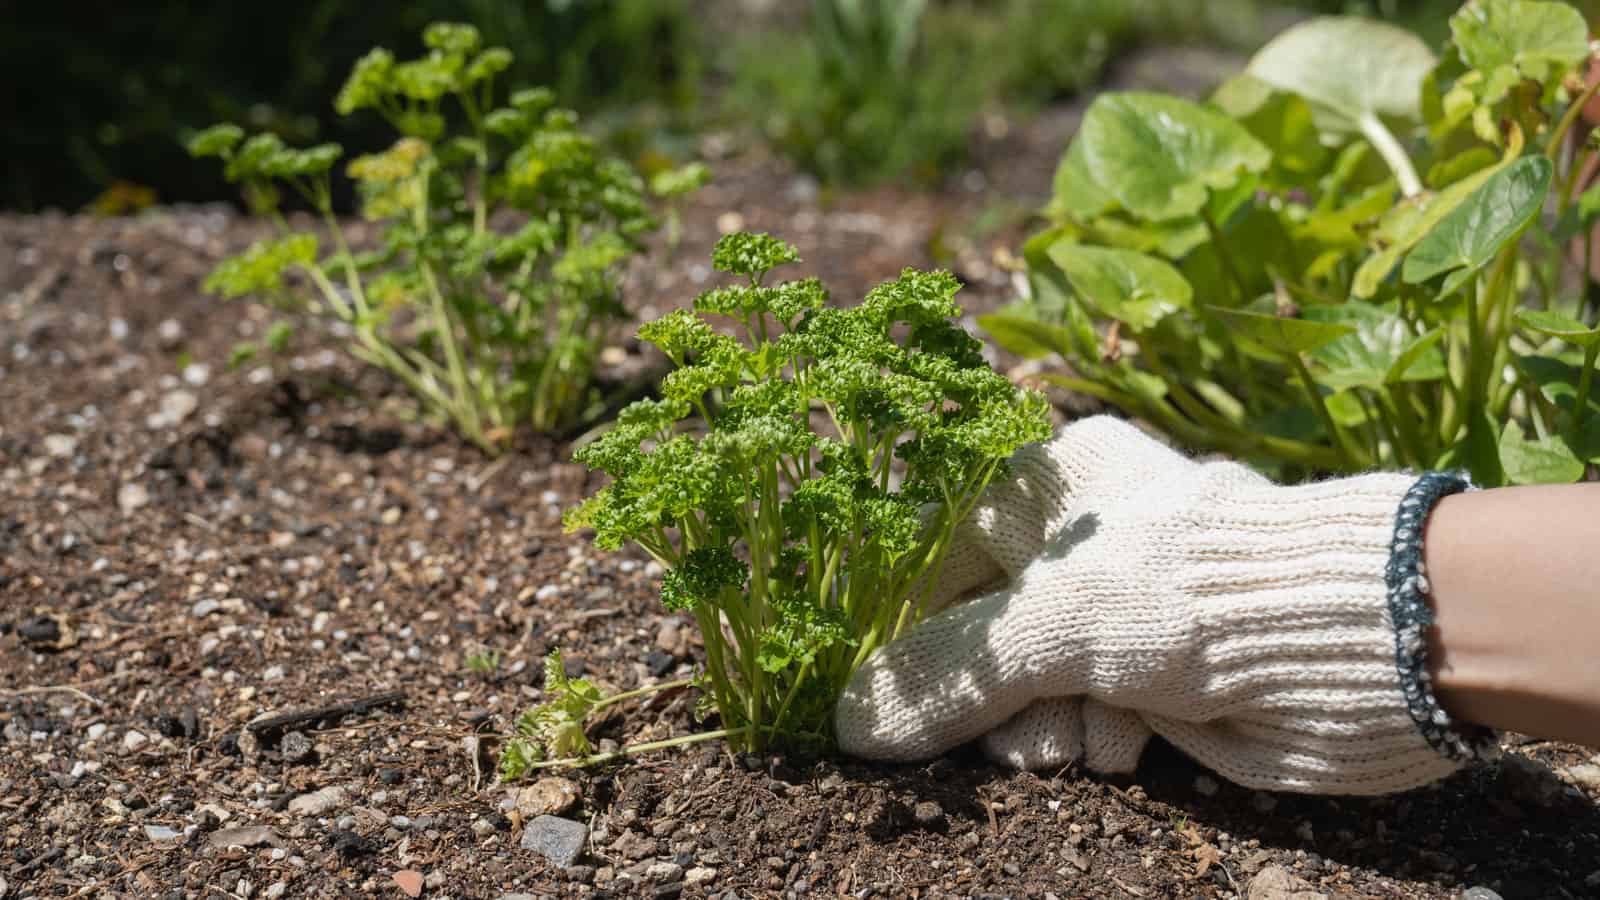 Removing parsley from the roots in the garden